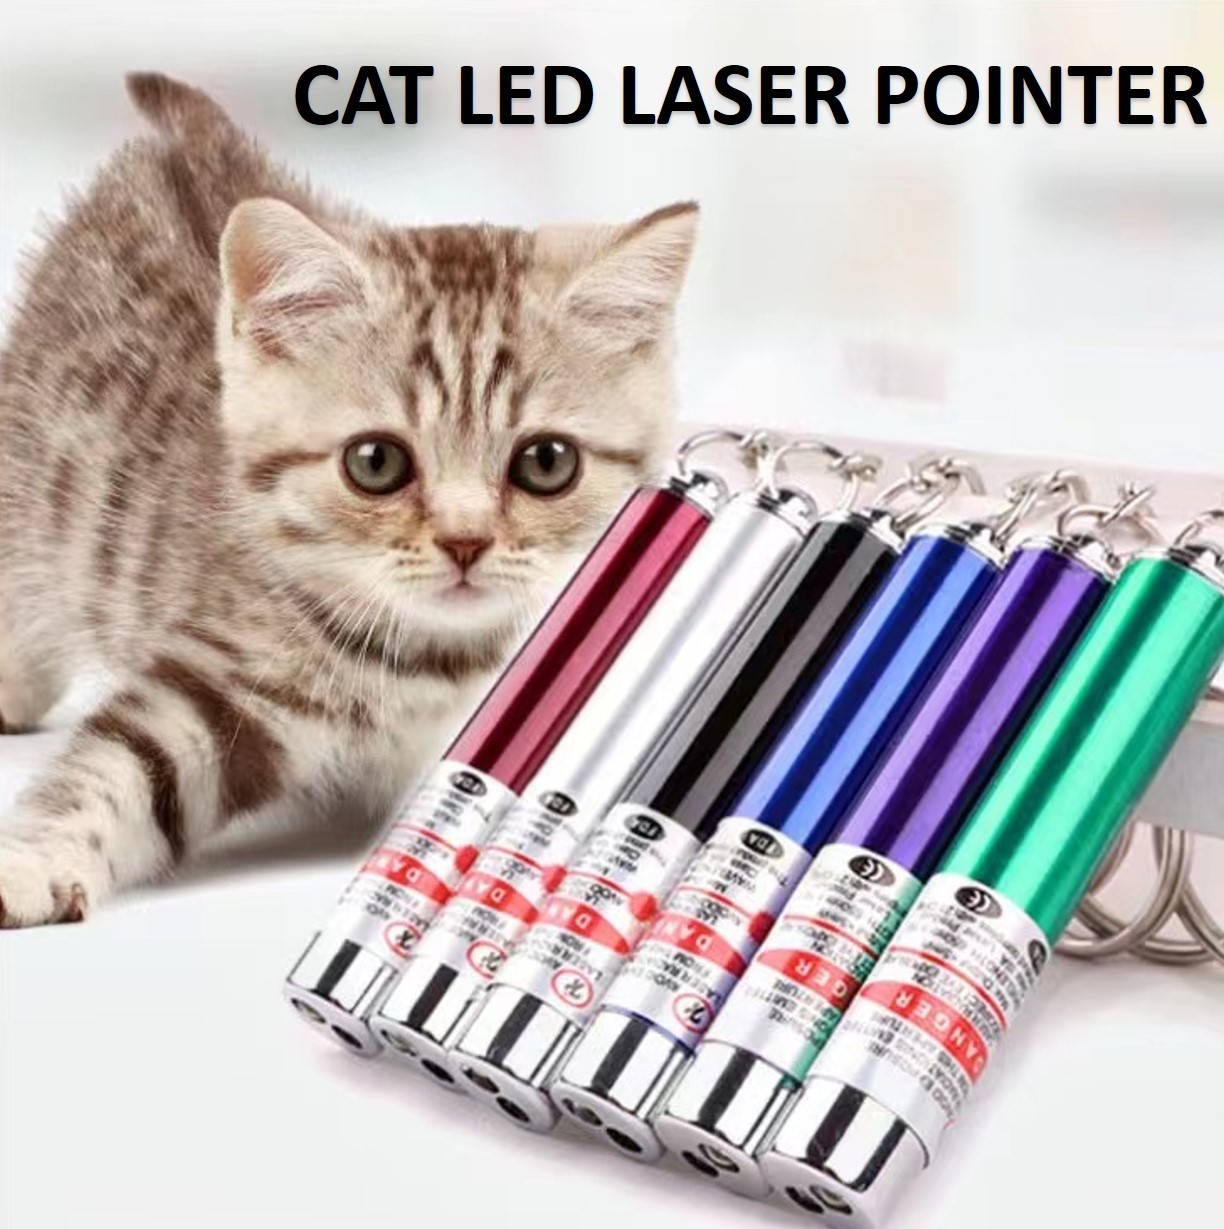 Free Battery Laser Funny Cat Stick New Cool 2 In1 Red Laser Pointer Pen  With White LED Light Mainan Kucing 激光逗猫器 | Lazada